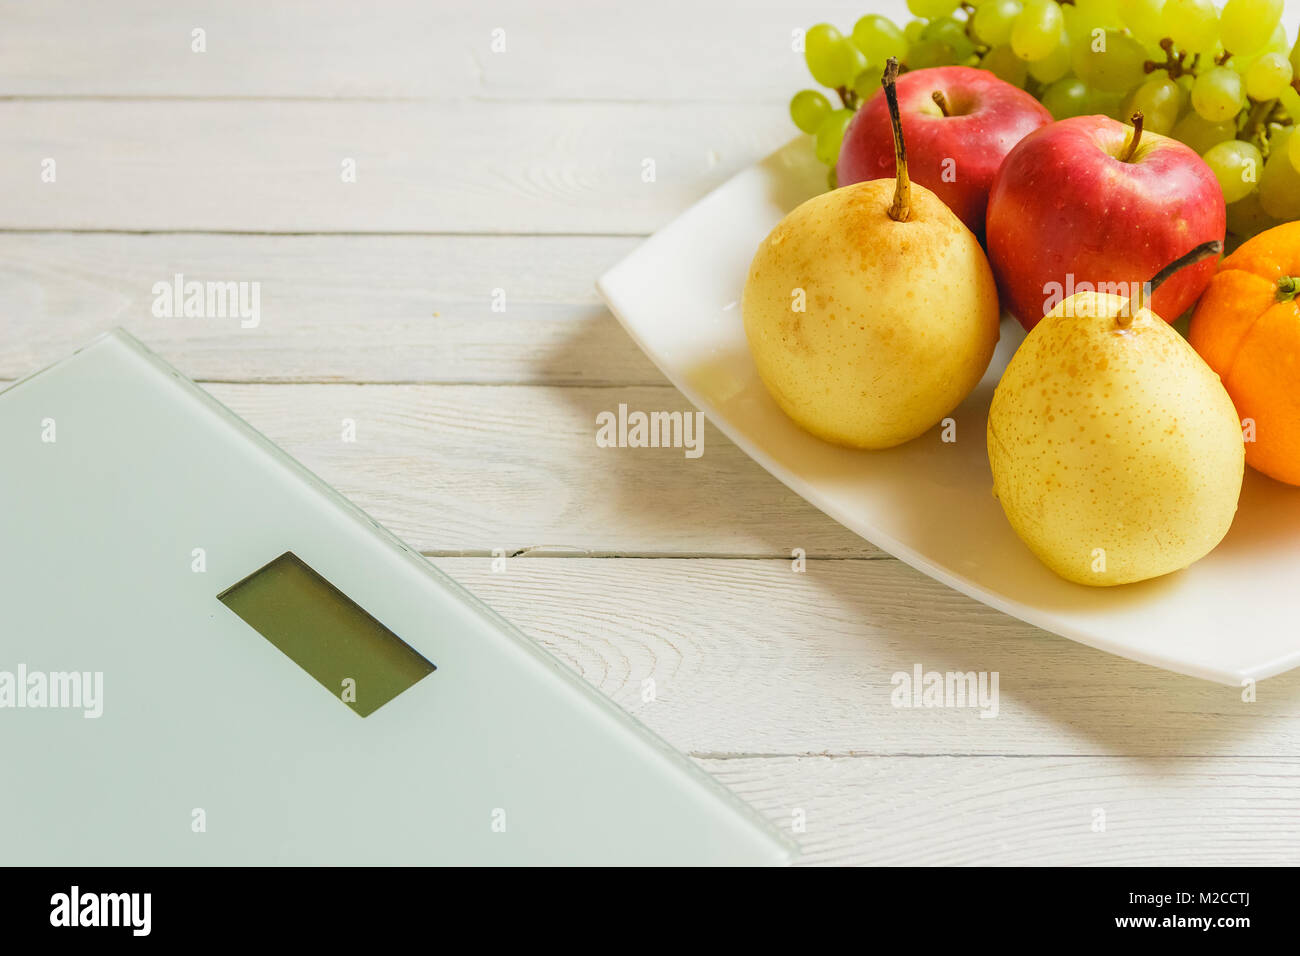 floor scale and fruits on wooden background Stock Photo